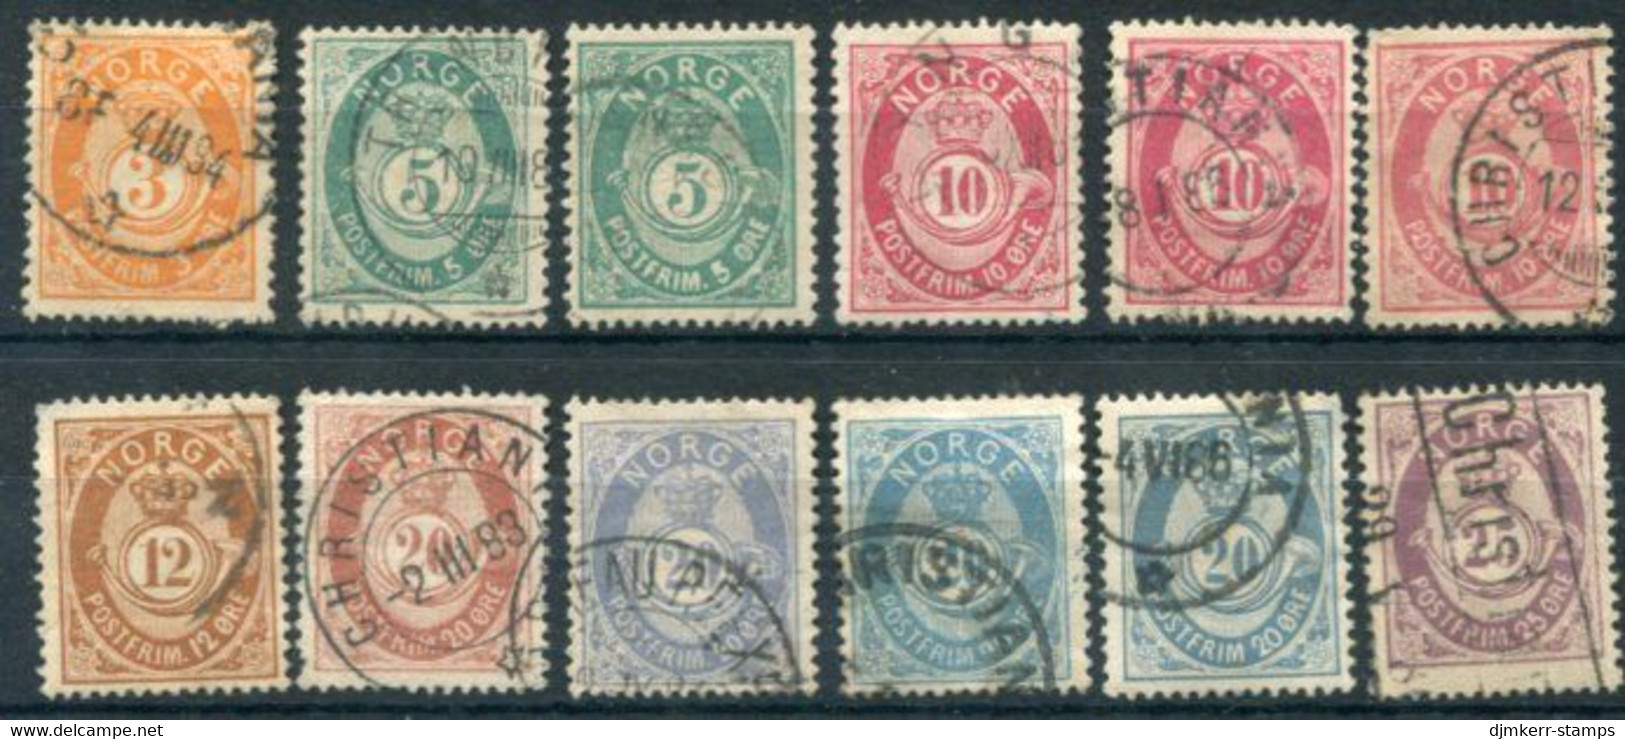 NORWAY 1882 Posthorn Definitive Set  Used.  Michel 35-42, Except 38. - Usati